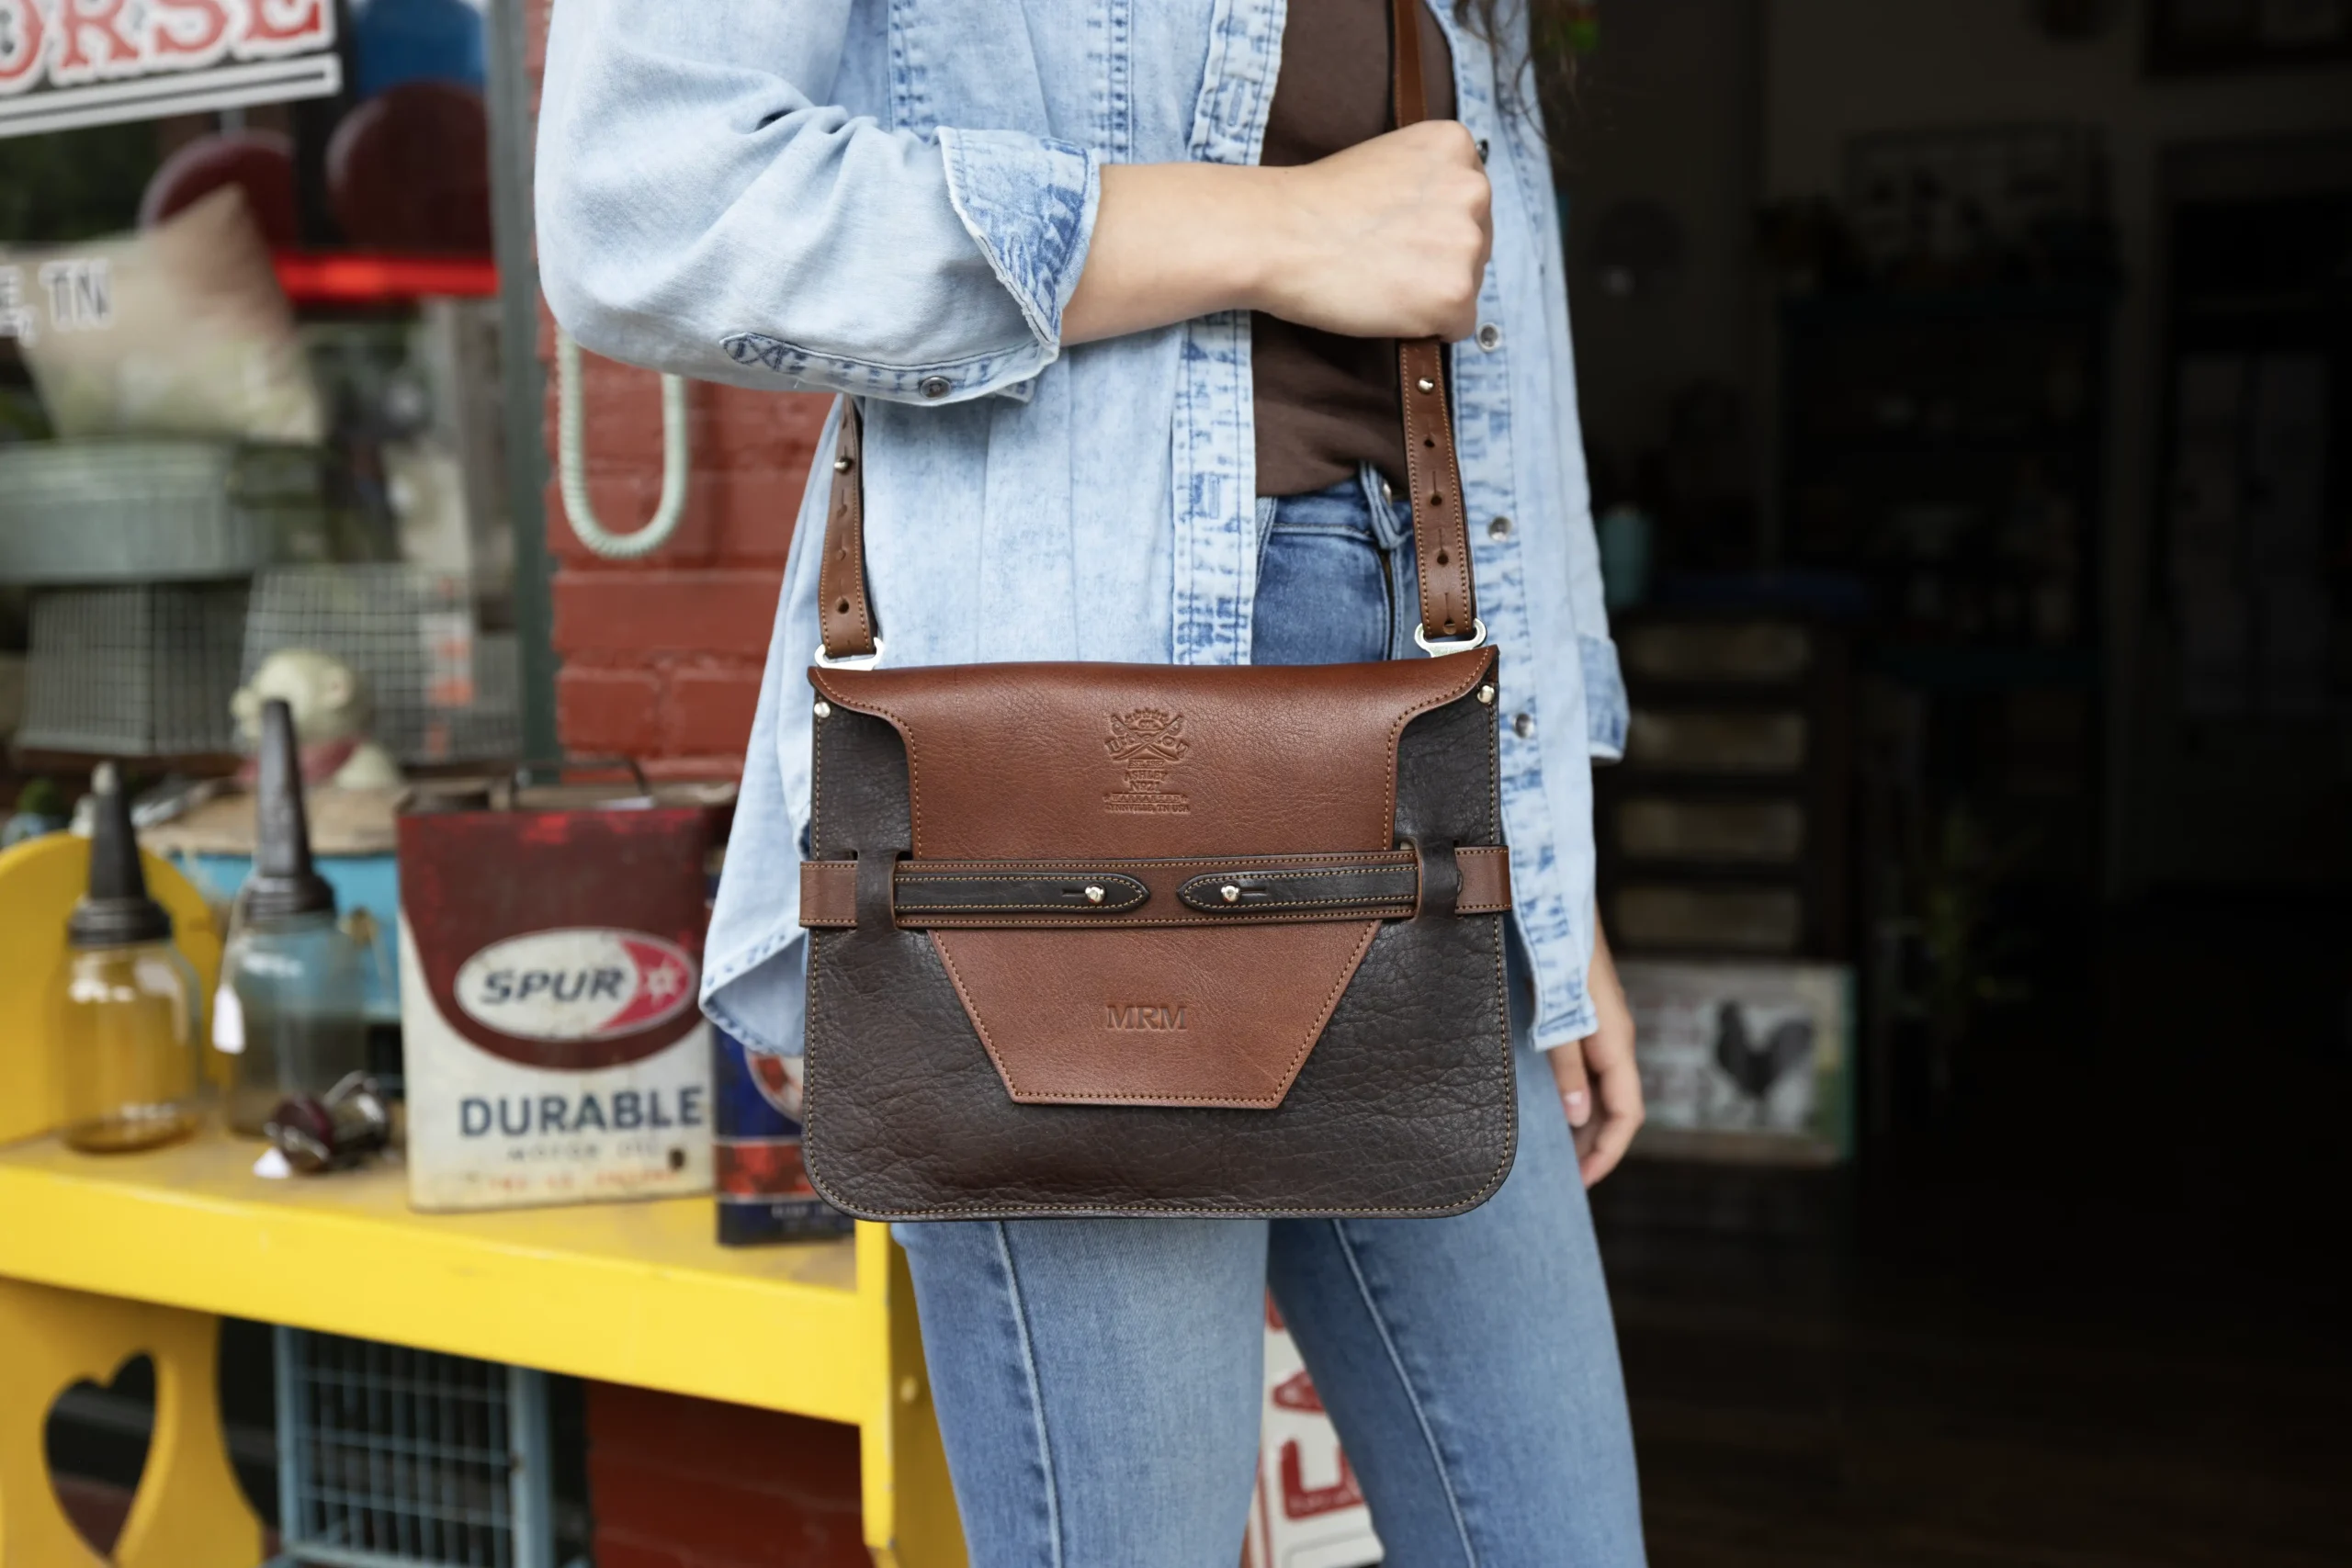 ashley handbag made of two-tone brown buffalo and steerhide leather - front view shown with a woman wearing it